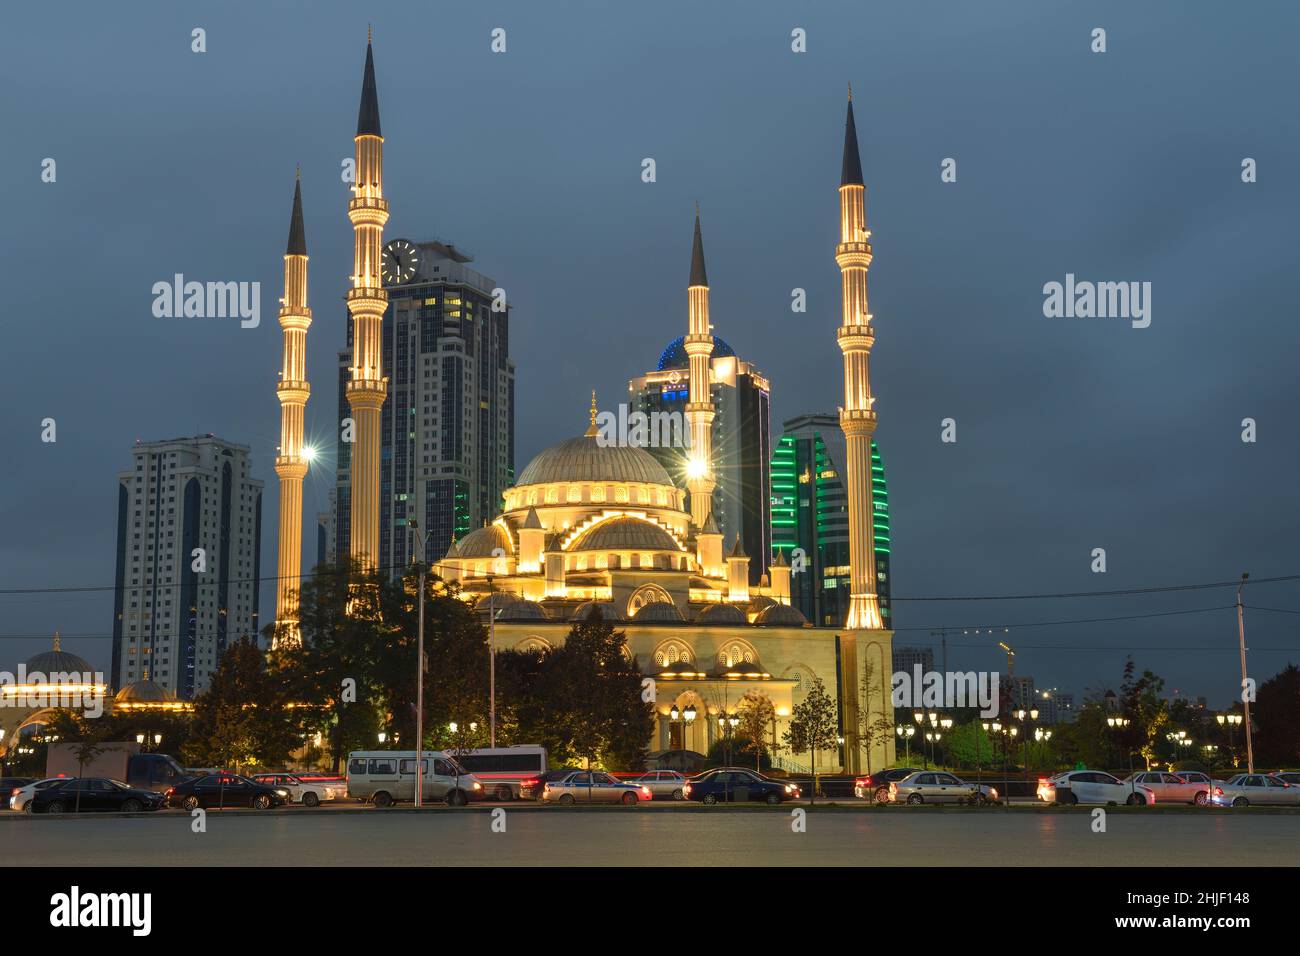 GROZNY, RUSSIA - SEPTEMBER 29, 2021: Mosque 'Heart of Chechnya' against the background of the modern business center 'Grozny City' Stock Photo